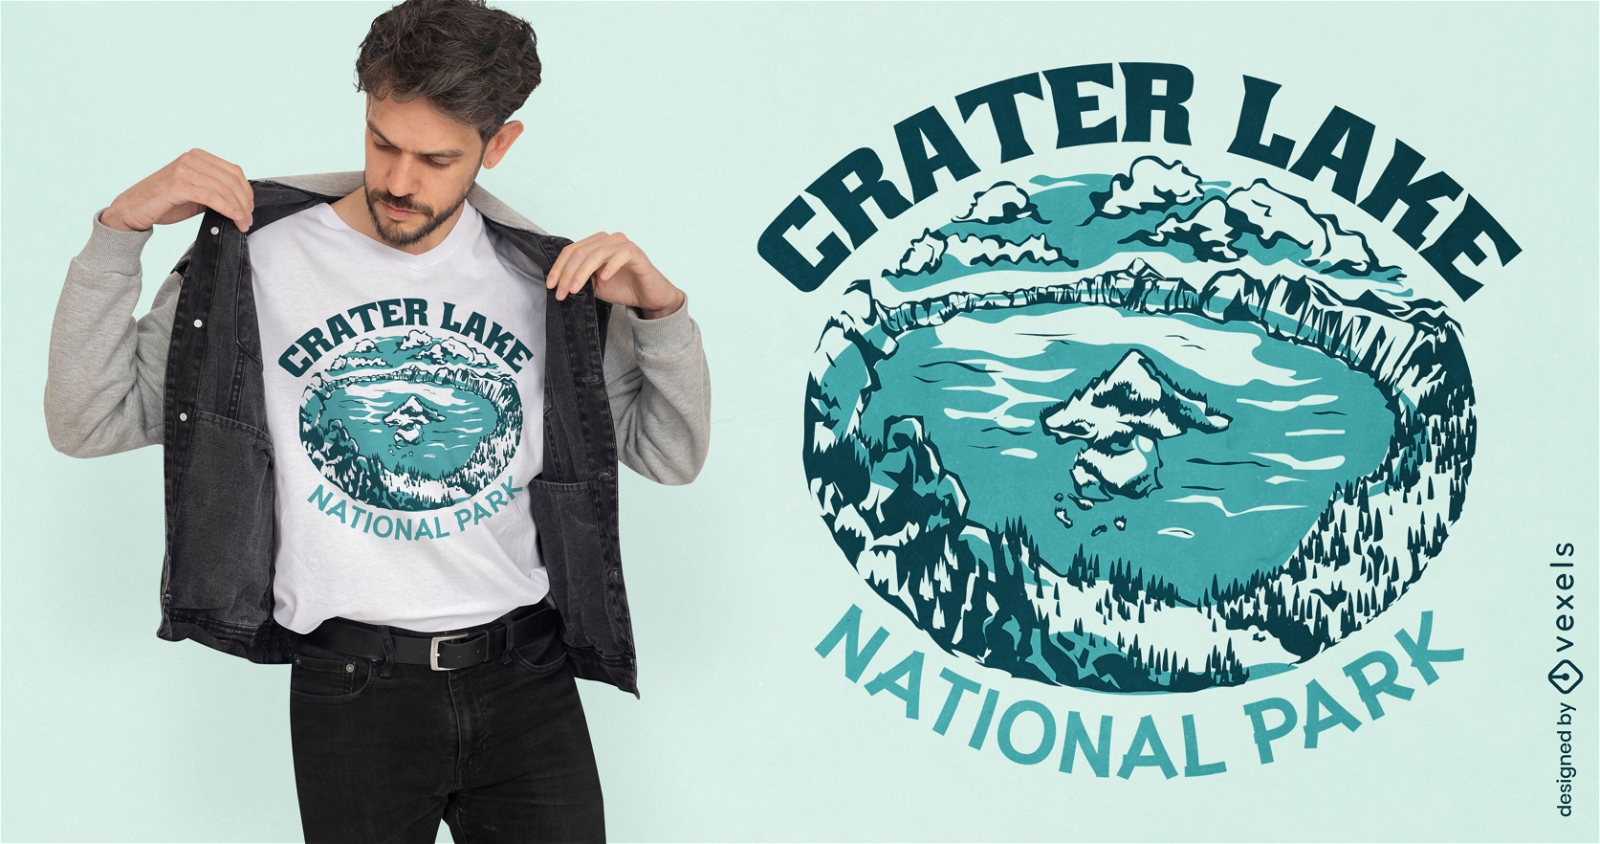 Kratersee-T-Shirt-Design